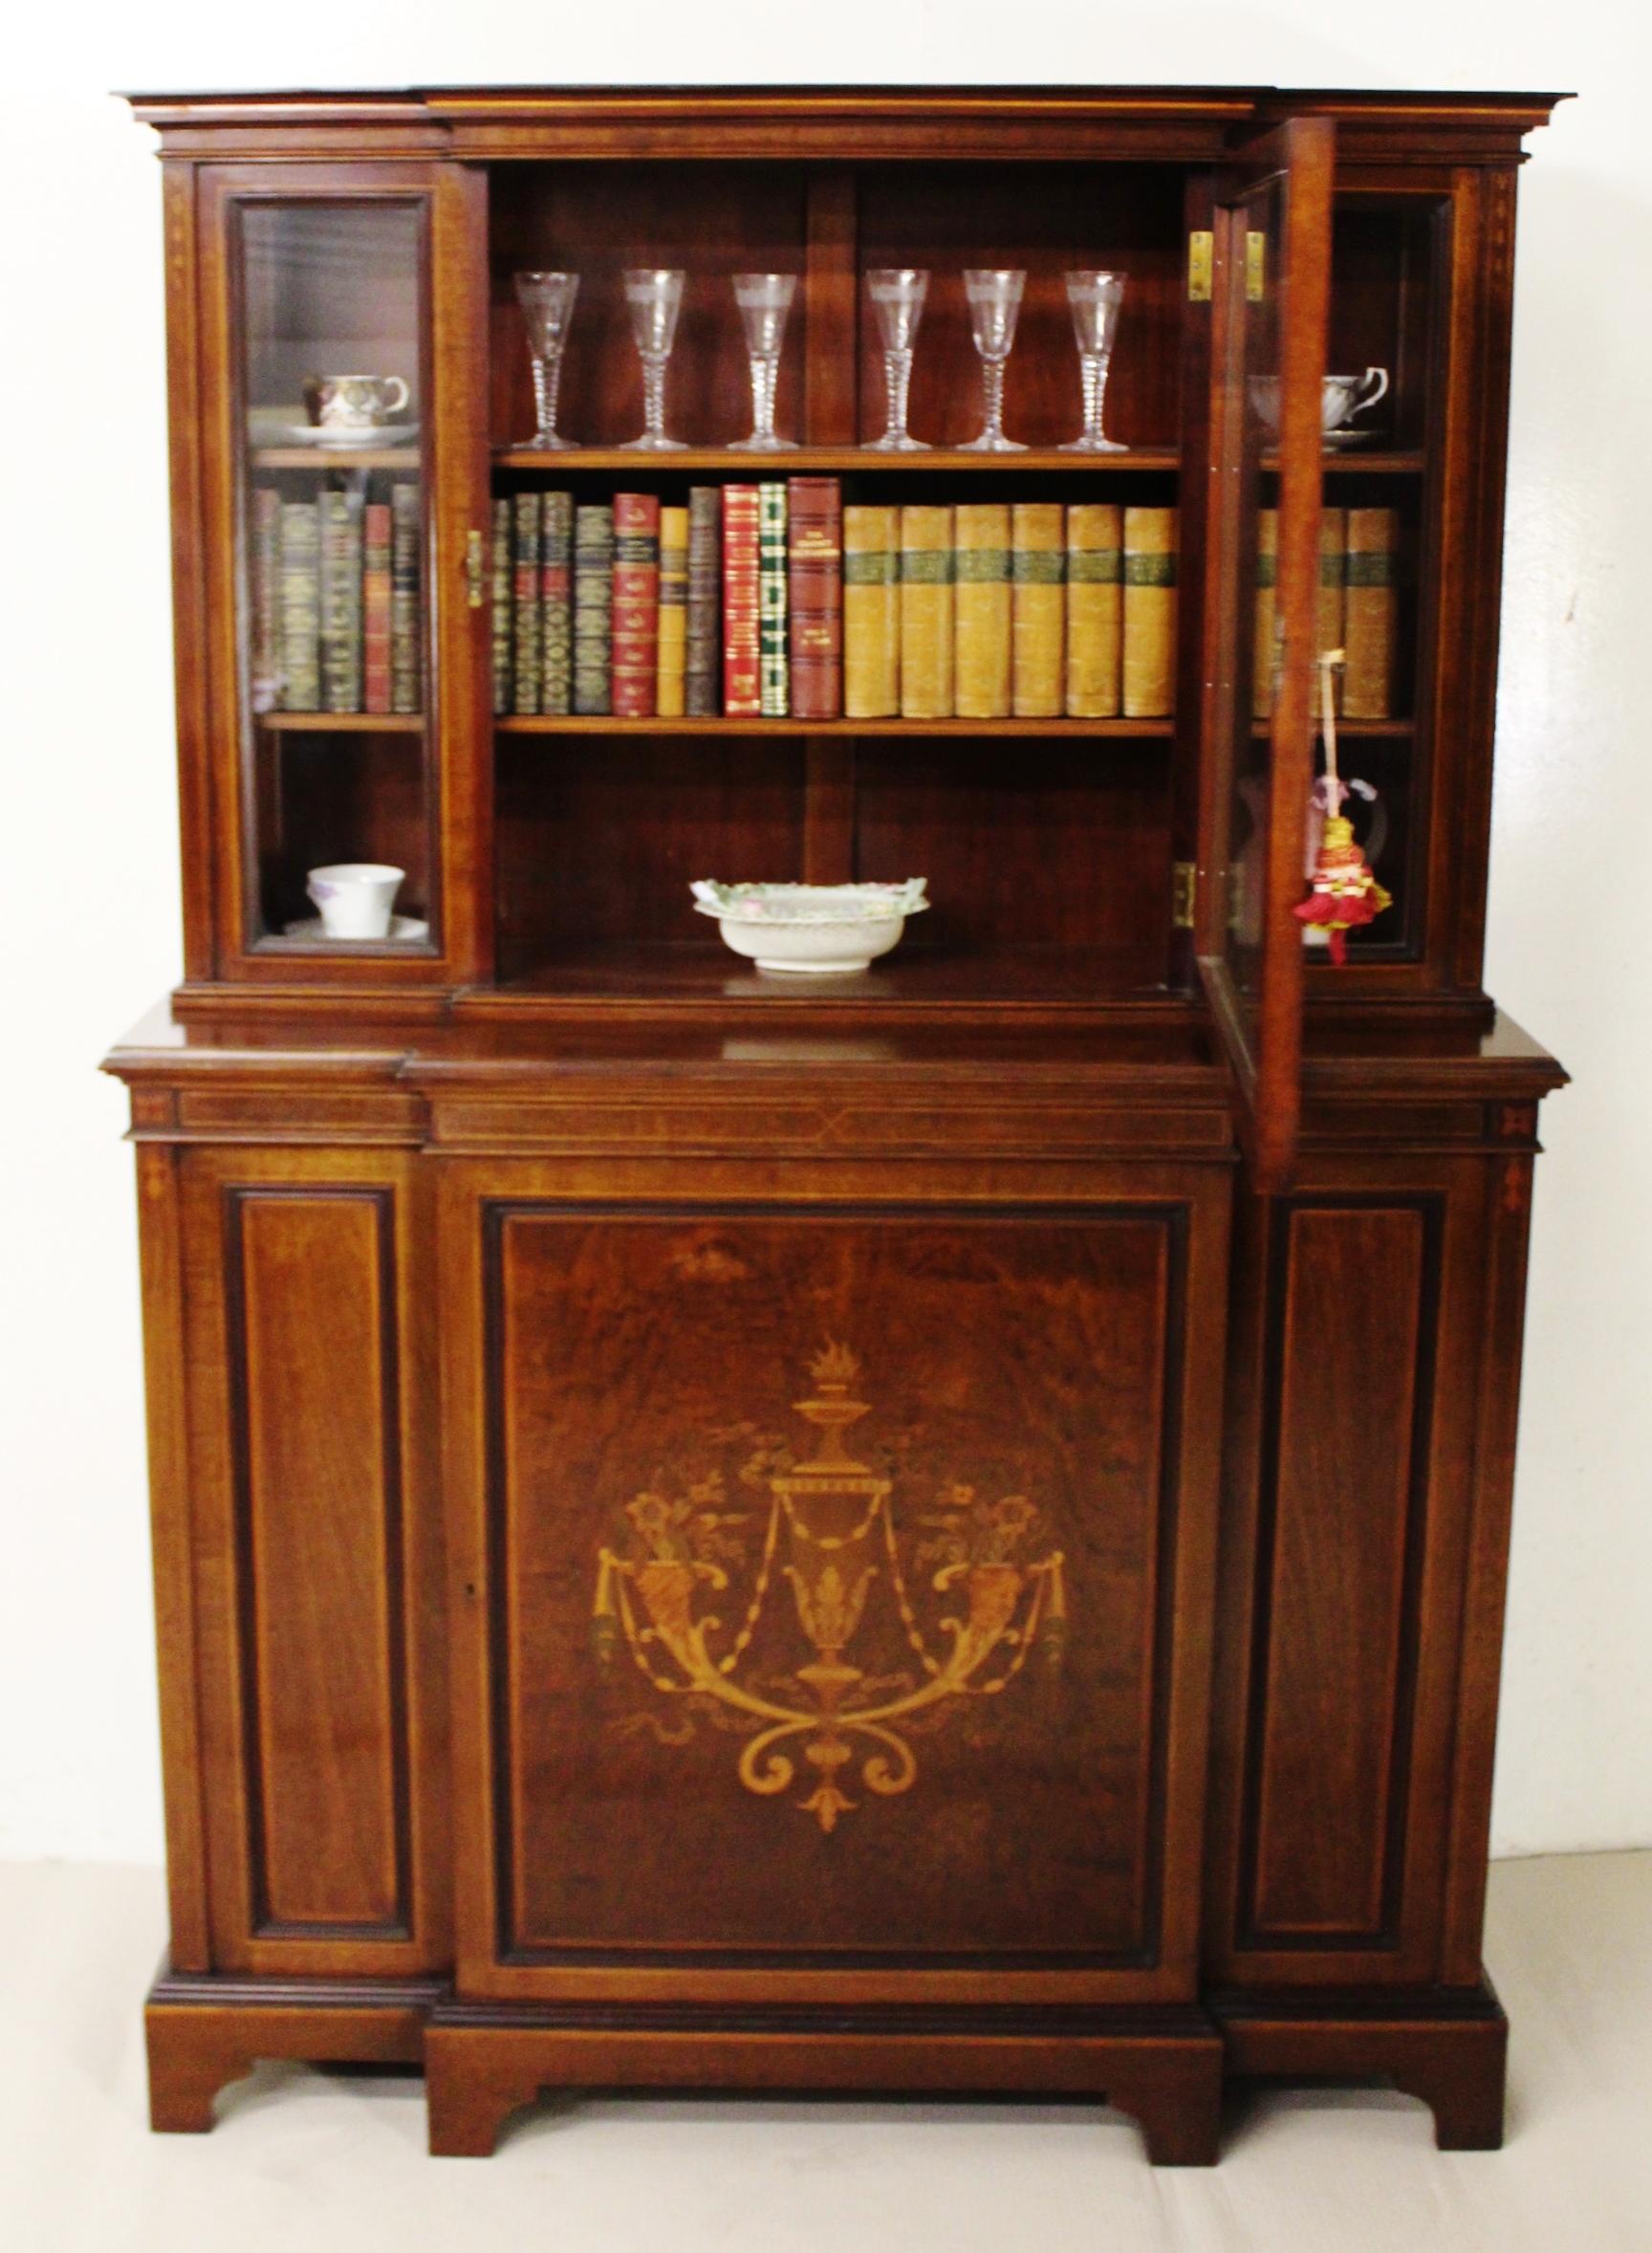 English Edwardian Period Inlaid Mahogany Bookcase/Cabinet by Jas Shoolbred For Sale 12